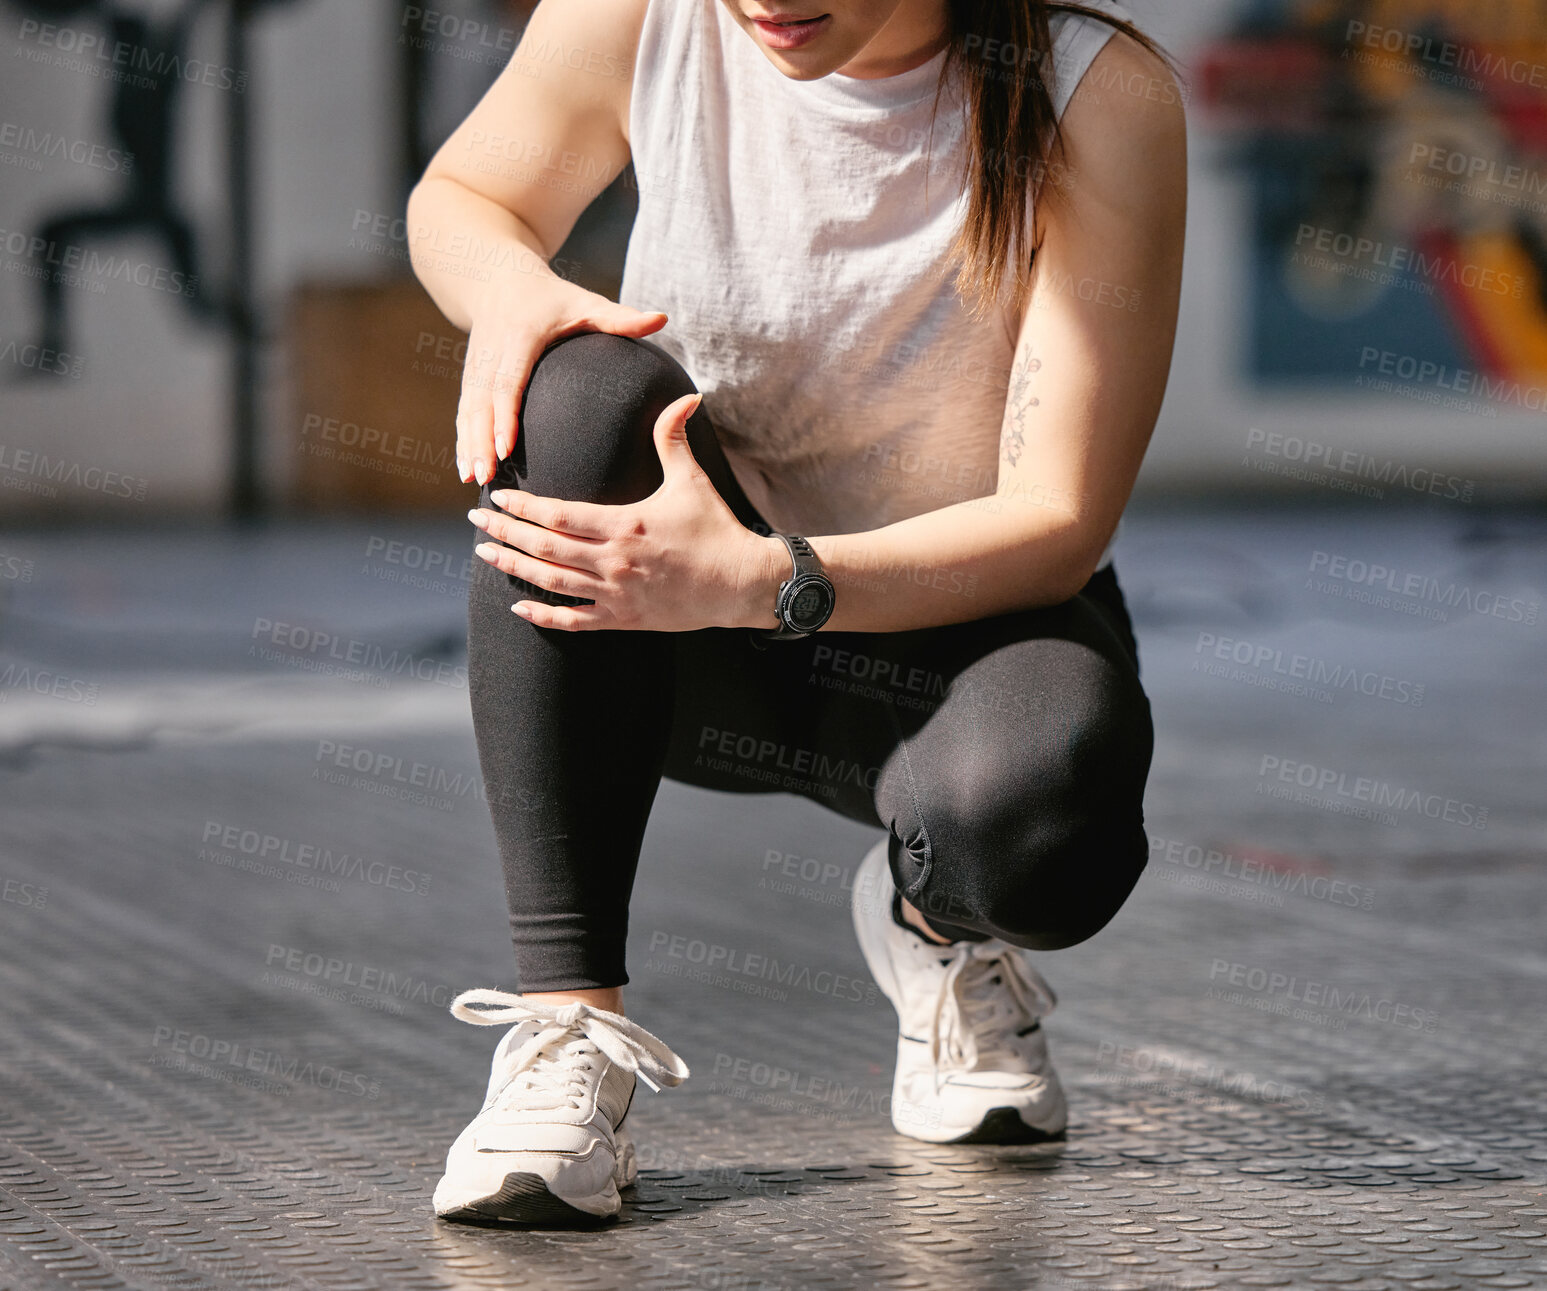 Buy stock photo Closeup of one caucasian woman holding her sore knee while exercising in a gym. Female athlete suffering with painful leg injury from fractured joint and inflamed muscles during workout. Struggling with stiff body cramps causing discomfort and strain